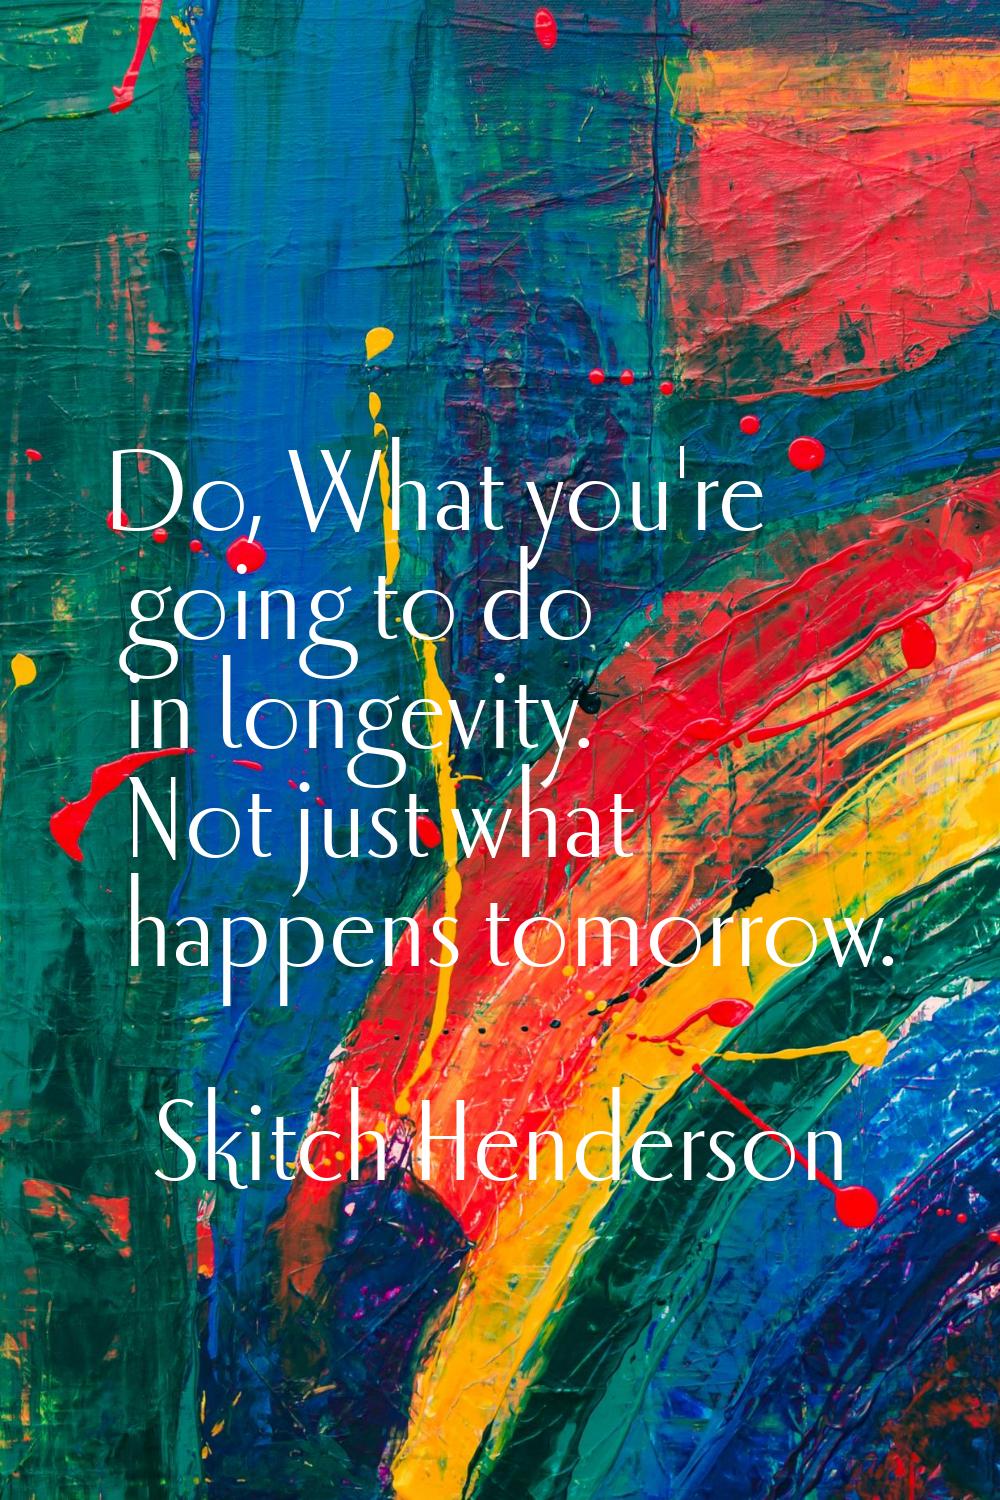 Do, What you're going to do in longevity. Not just what happens tomorrow.